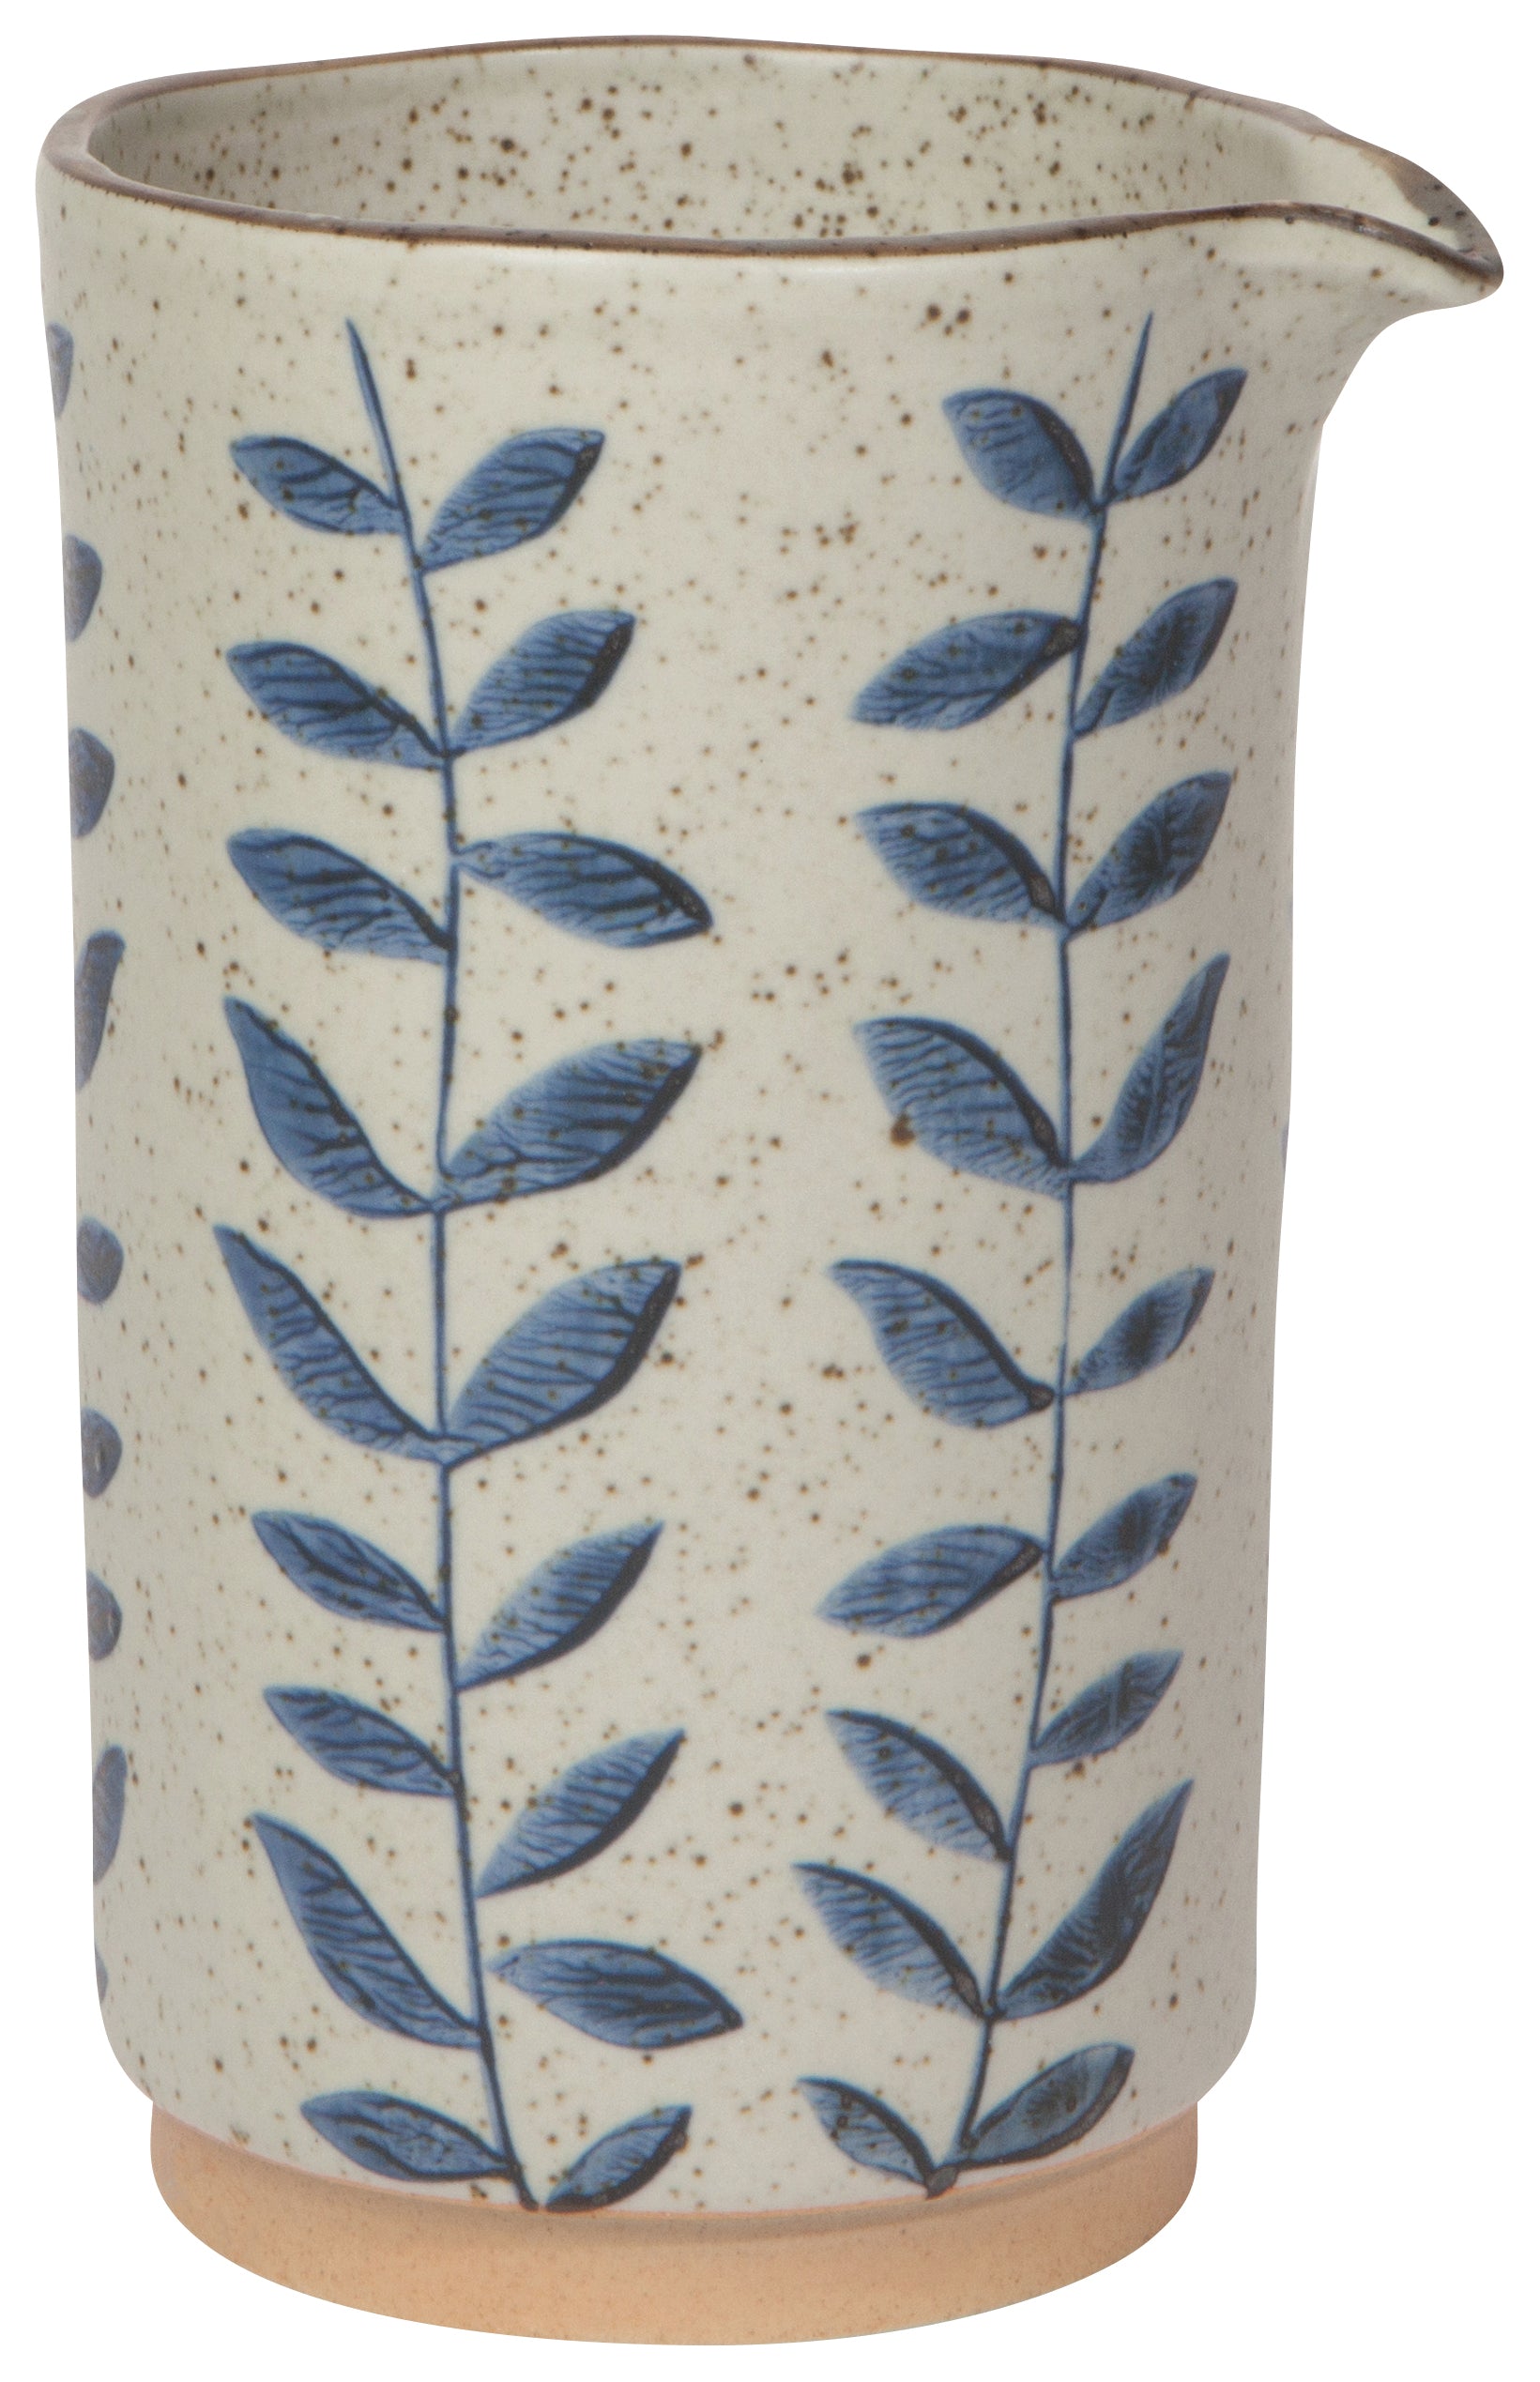 off-white speckled cream pitcher with a vertical blue vine design.